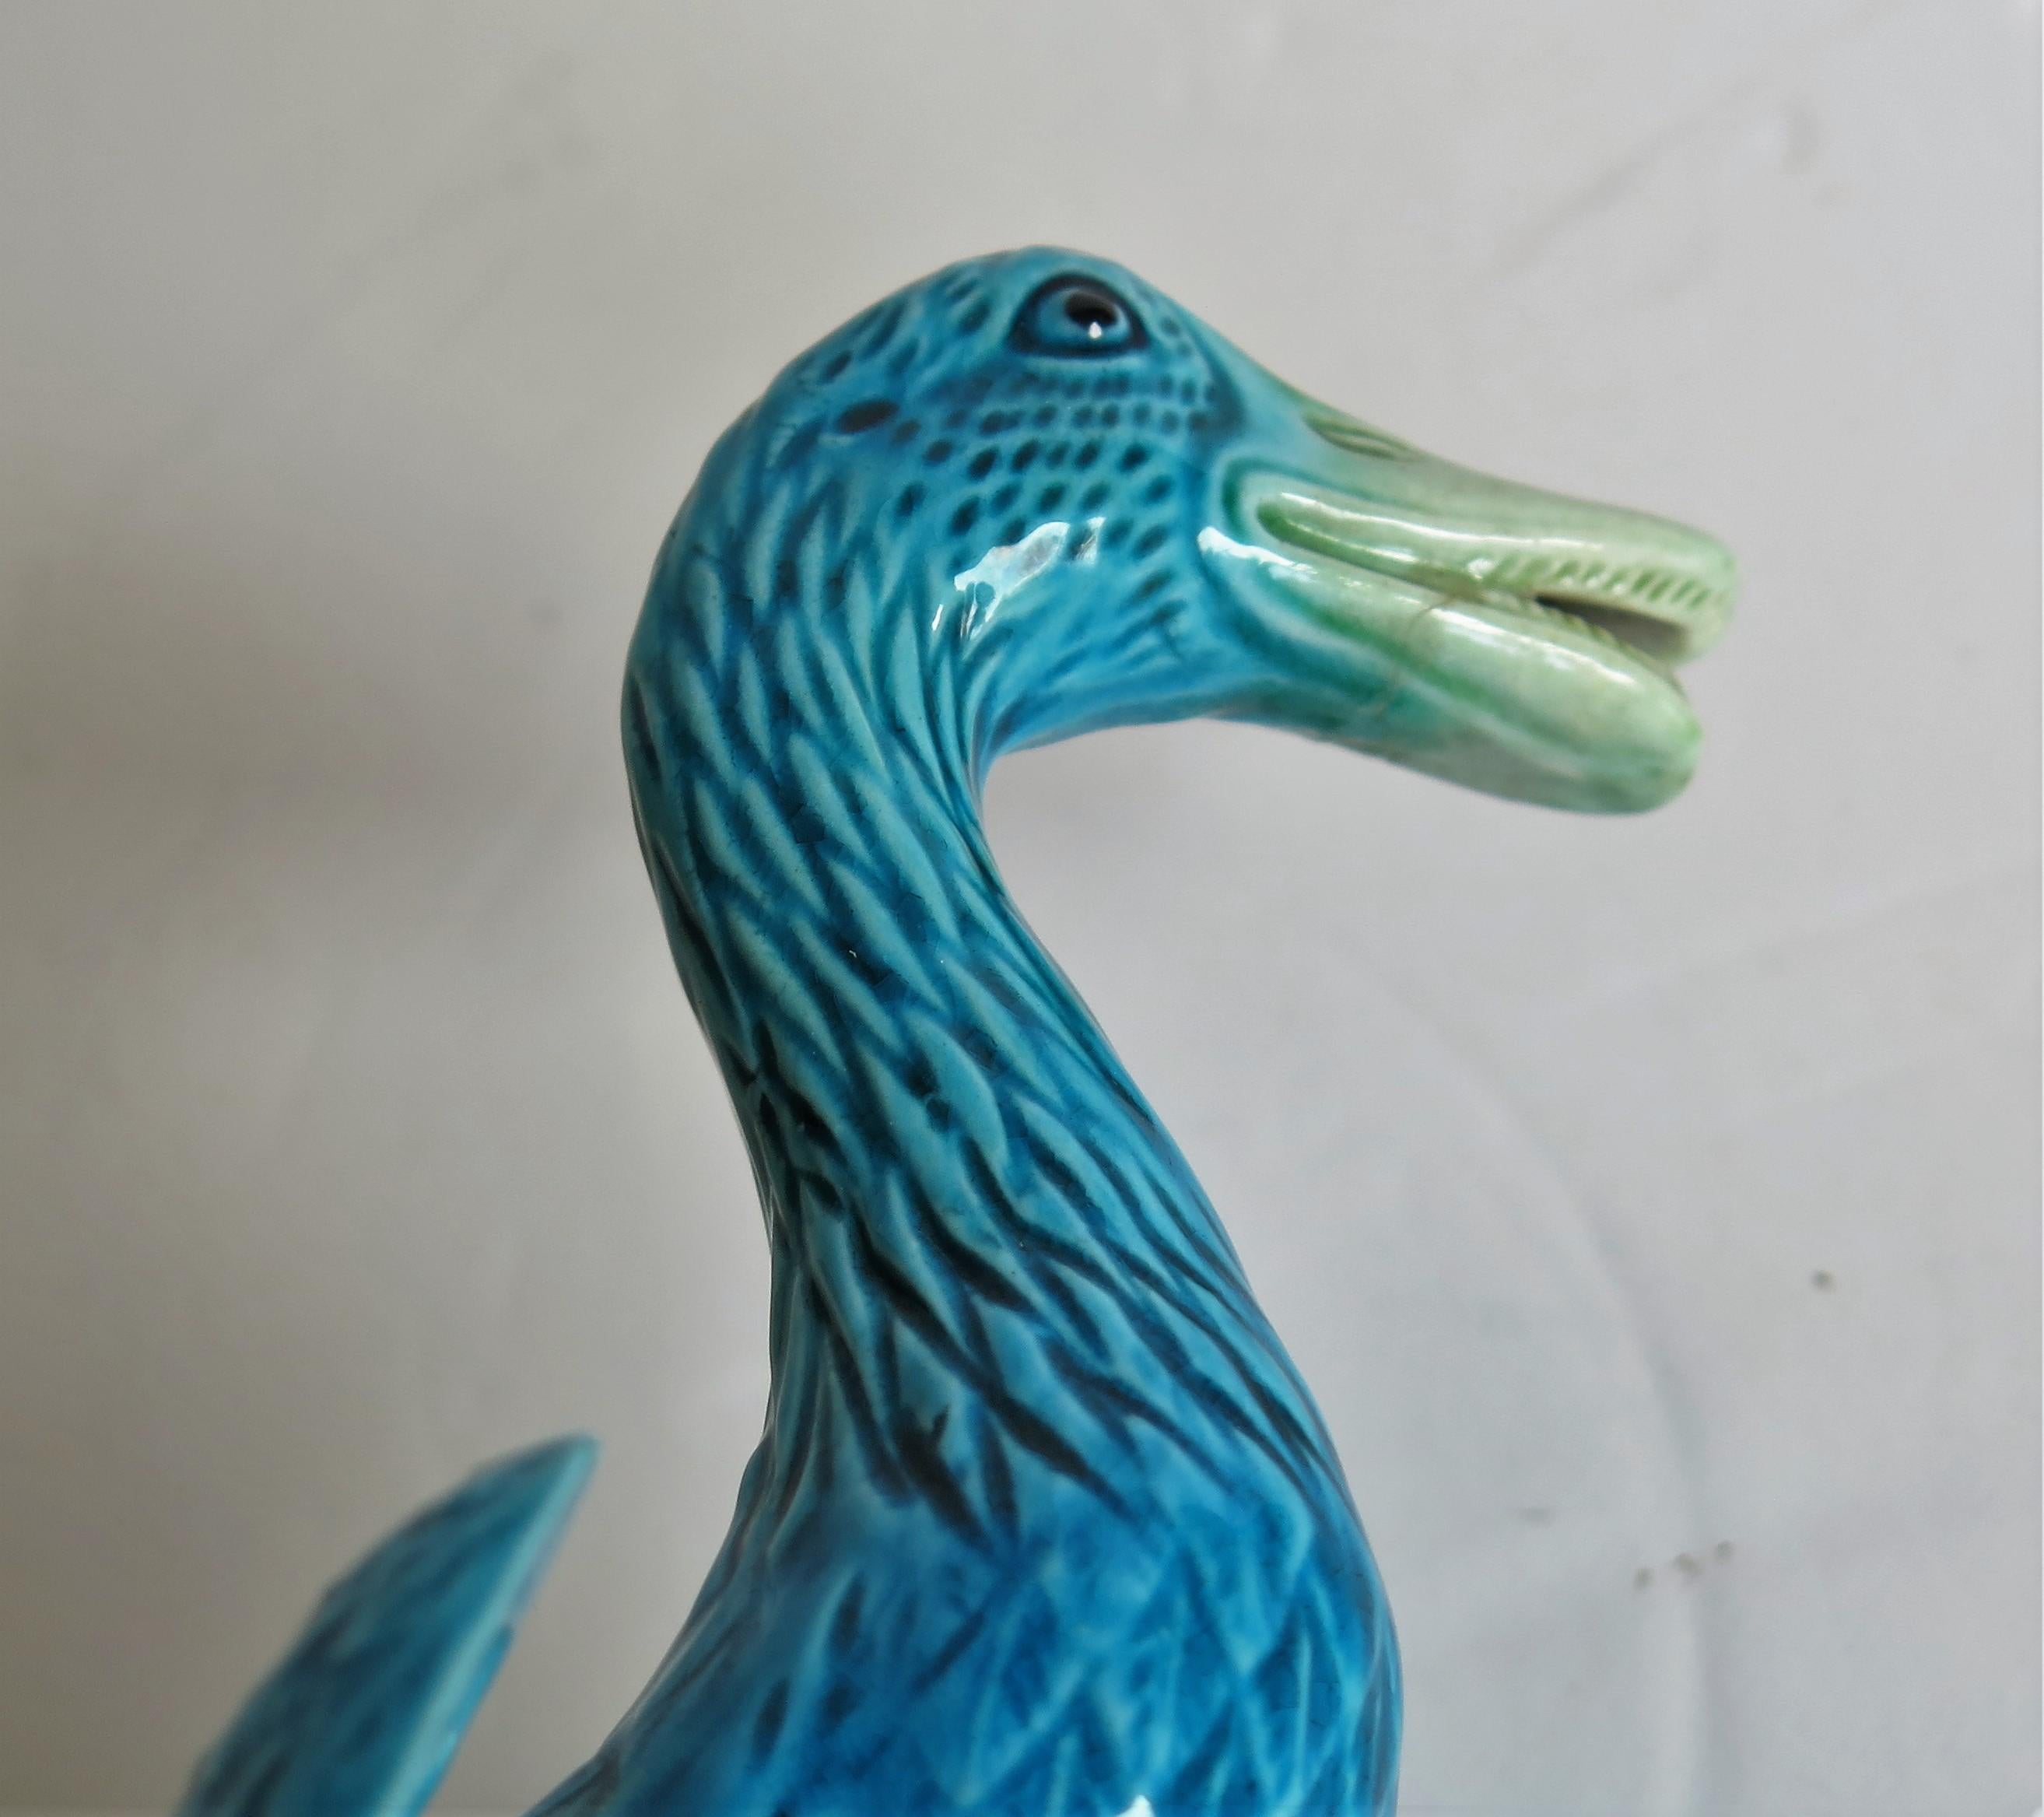 Two Chinese Export Porcelain Geese or Goose Bird Figurines in Poychrome Enamels 7